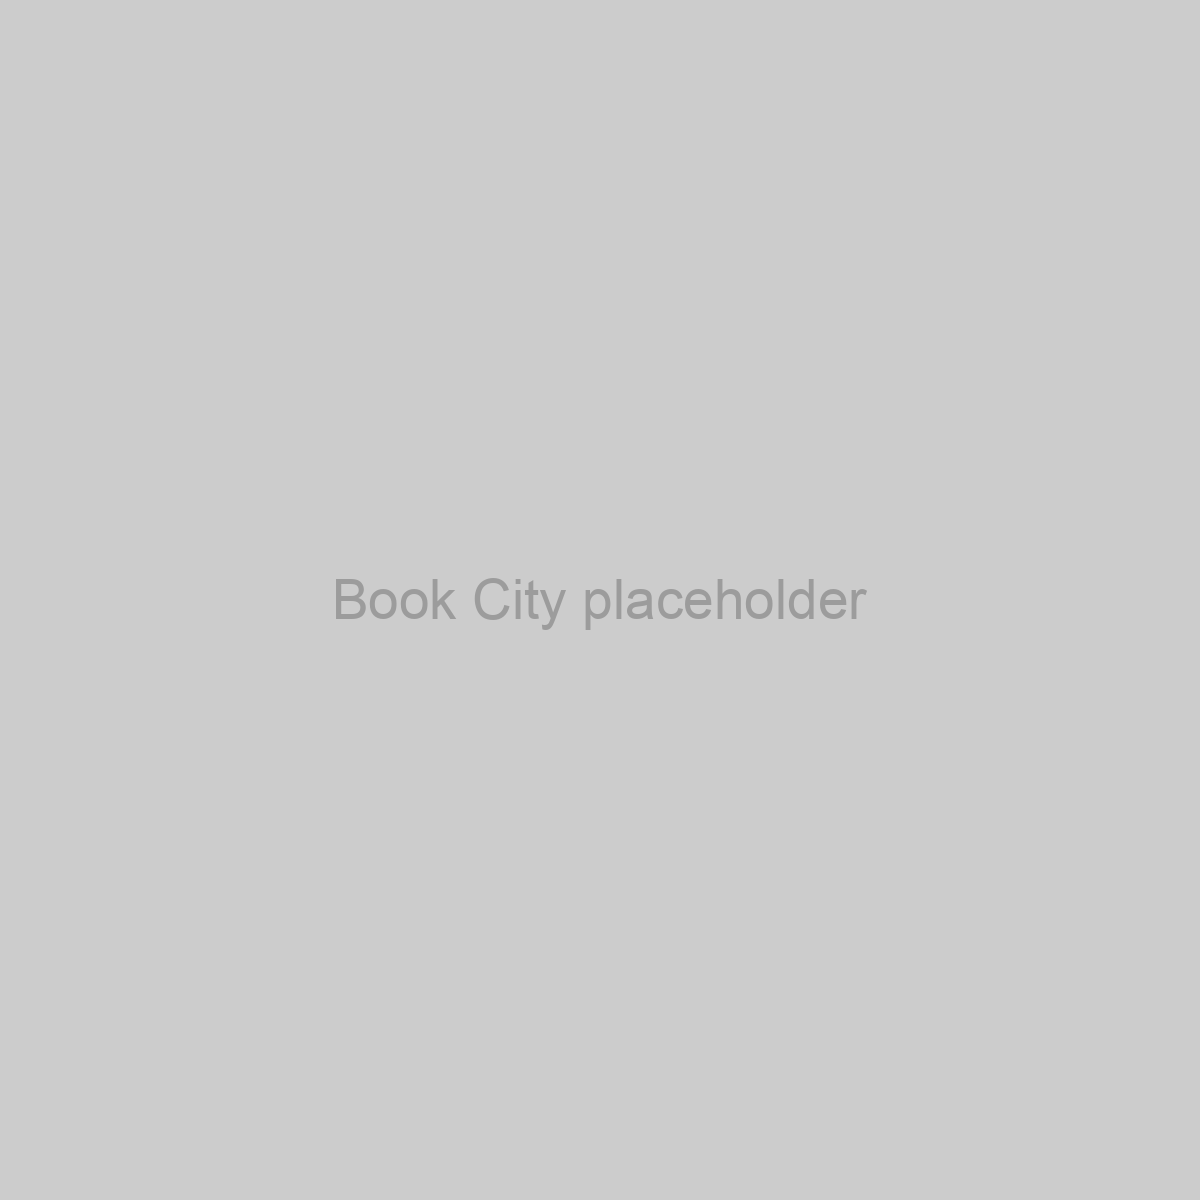 Book City Placeholder Image